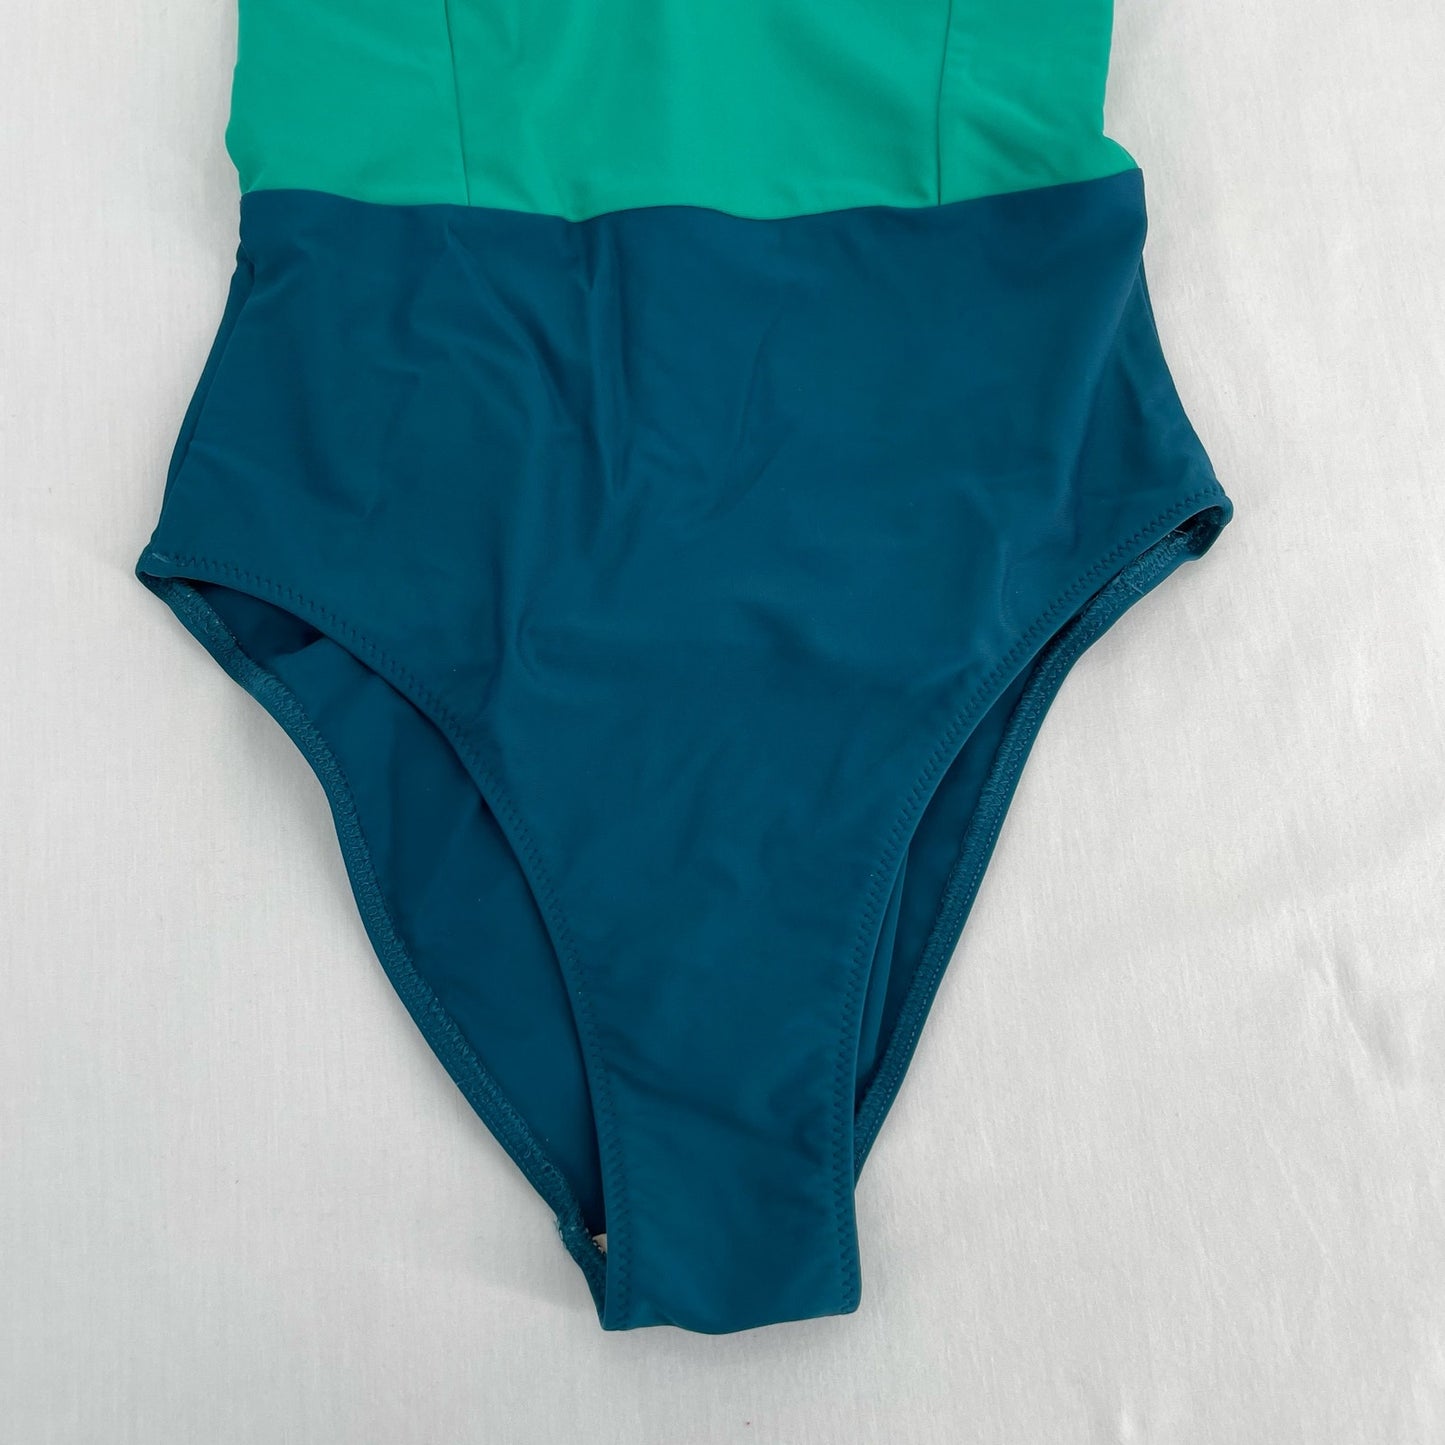 Summersalt The Swan Dive Green Teal Seaglass Seaweed Keyhole One Piece Swimsuit, Size 2